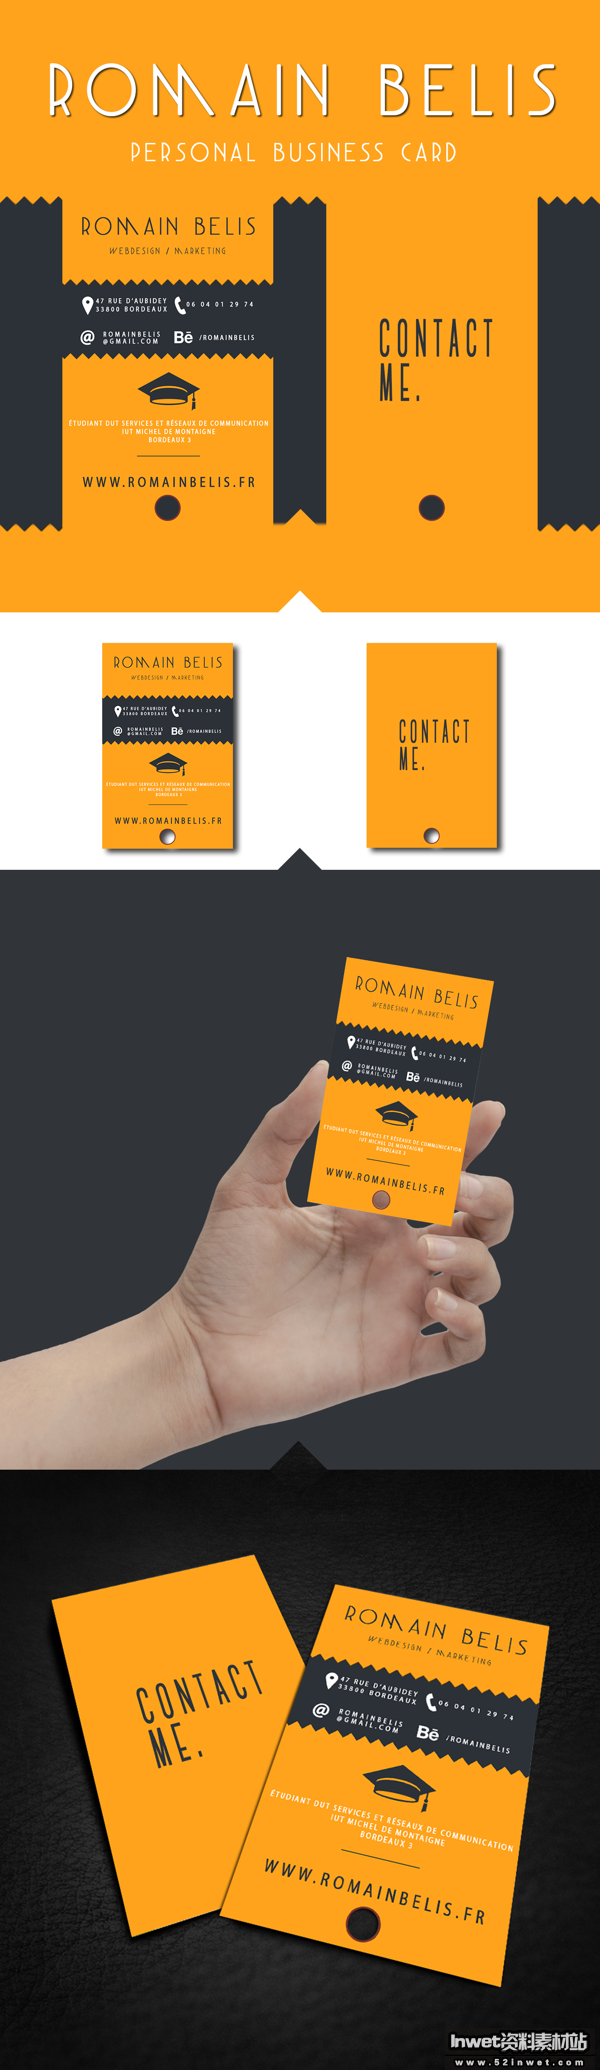 My Personal Business Card by Romain Belis in Showcase of 50 Creative Business Cards